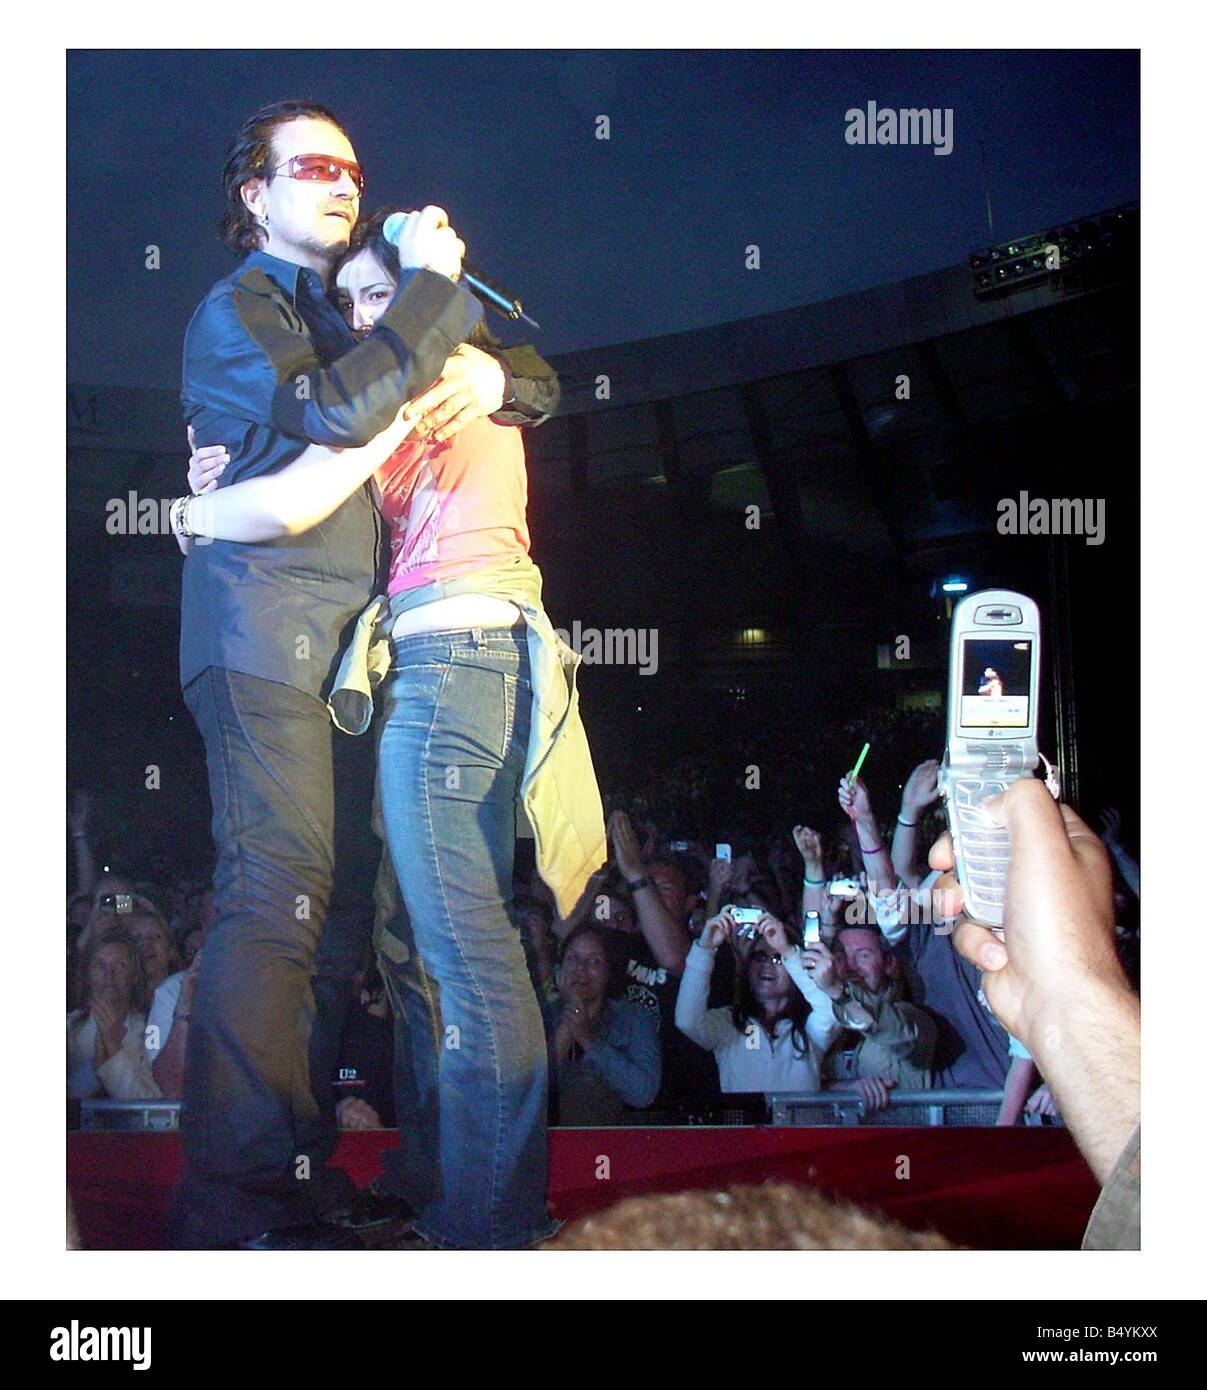 U2 on stage at Hampden Glasgow June 2005 Maria pia Coppola of Hillview terrace Corstorphine who was plucked from the crowd by Bono at last nights gig in Hampden cuddling hugging crying Stock Photo